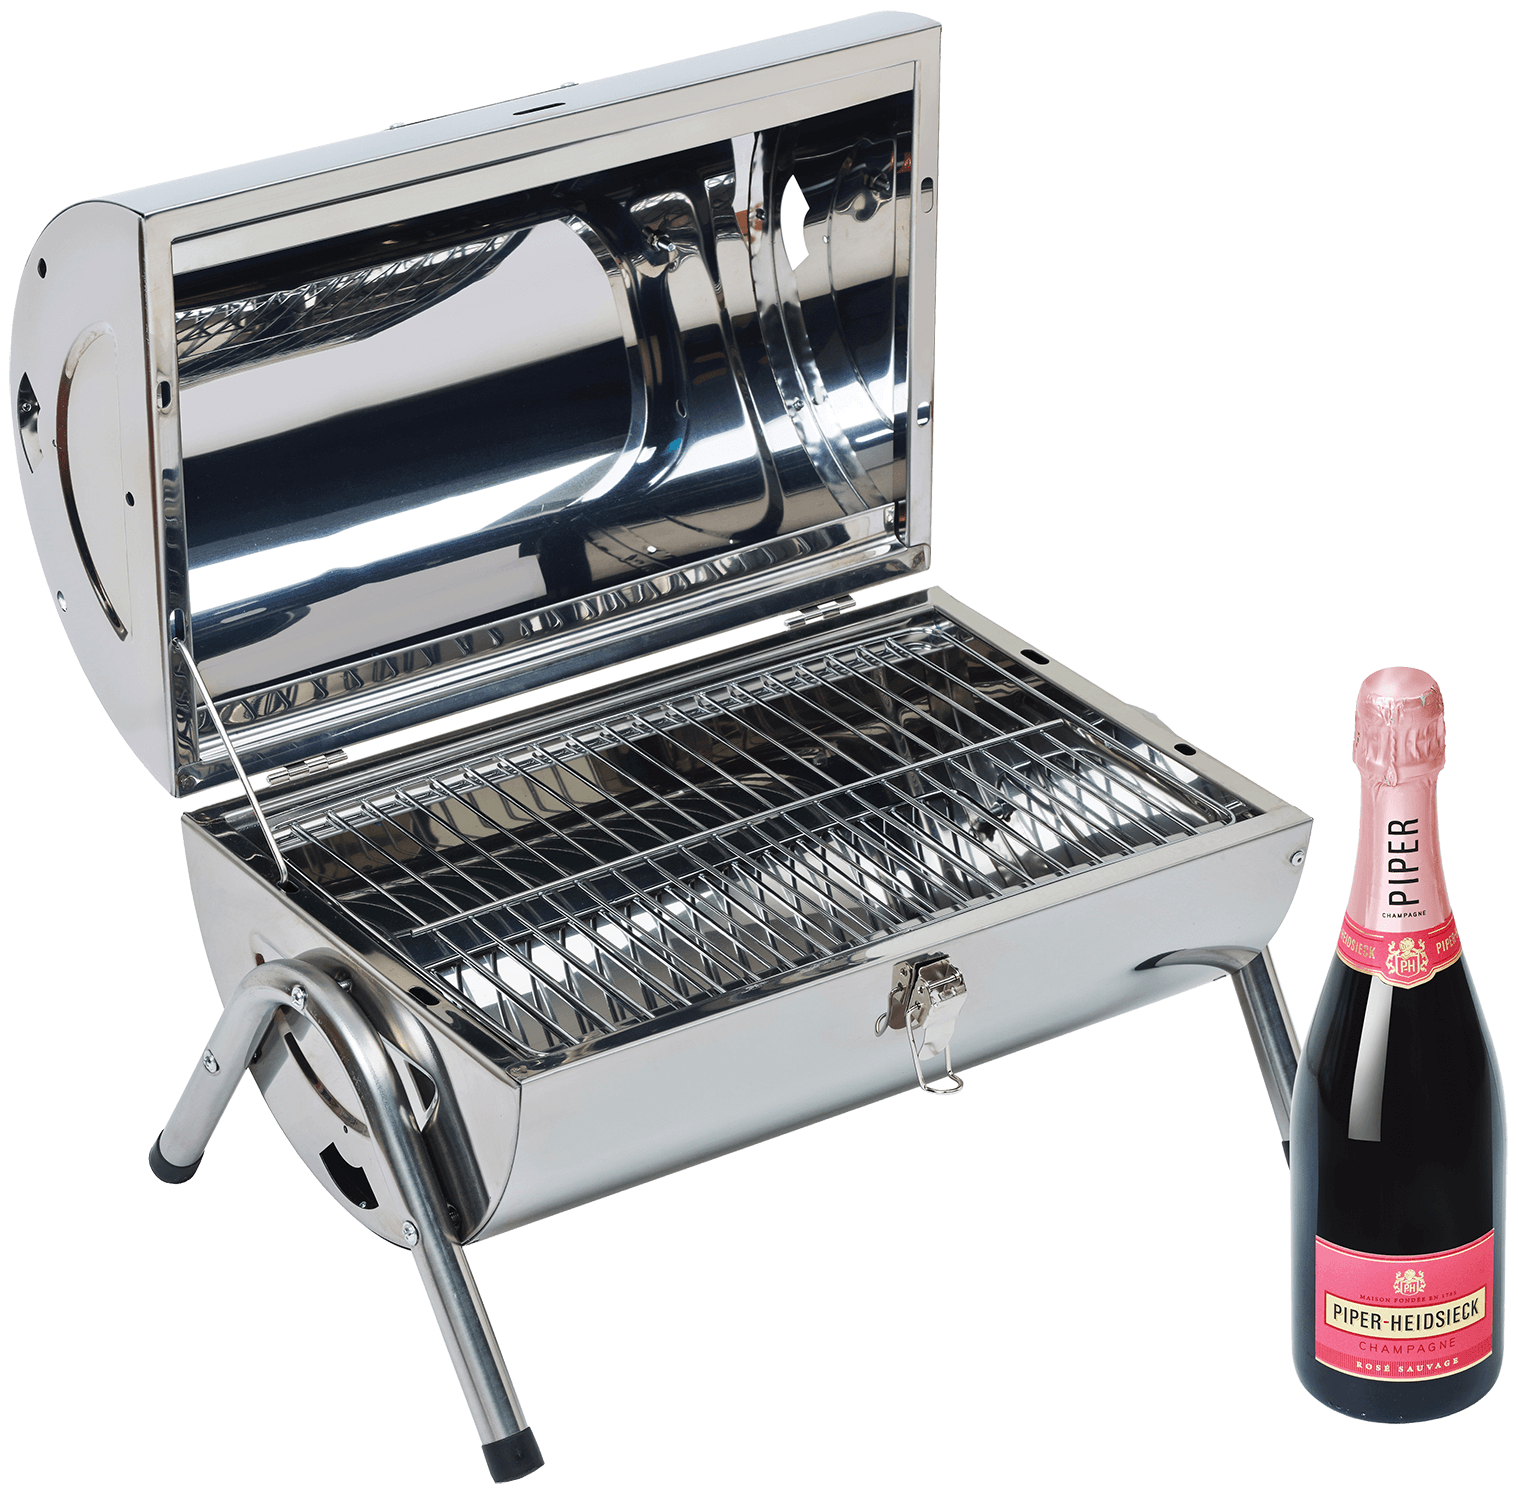 Piper-Heidsieck Sauvage Rose Brut Champagne AOC (gift box BBQ) ruinart rose champagne aoc gift box